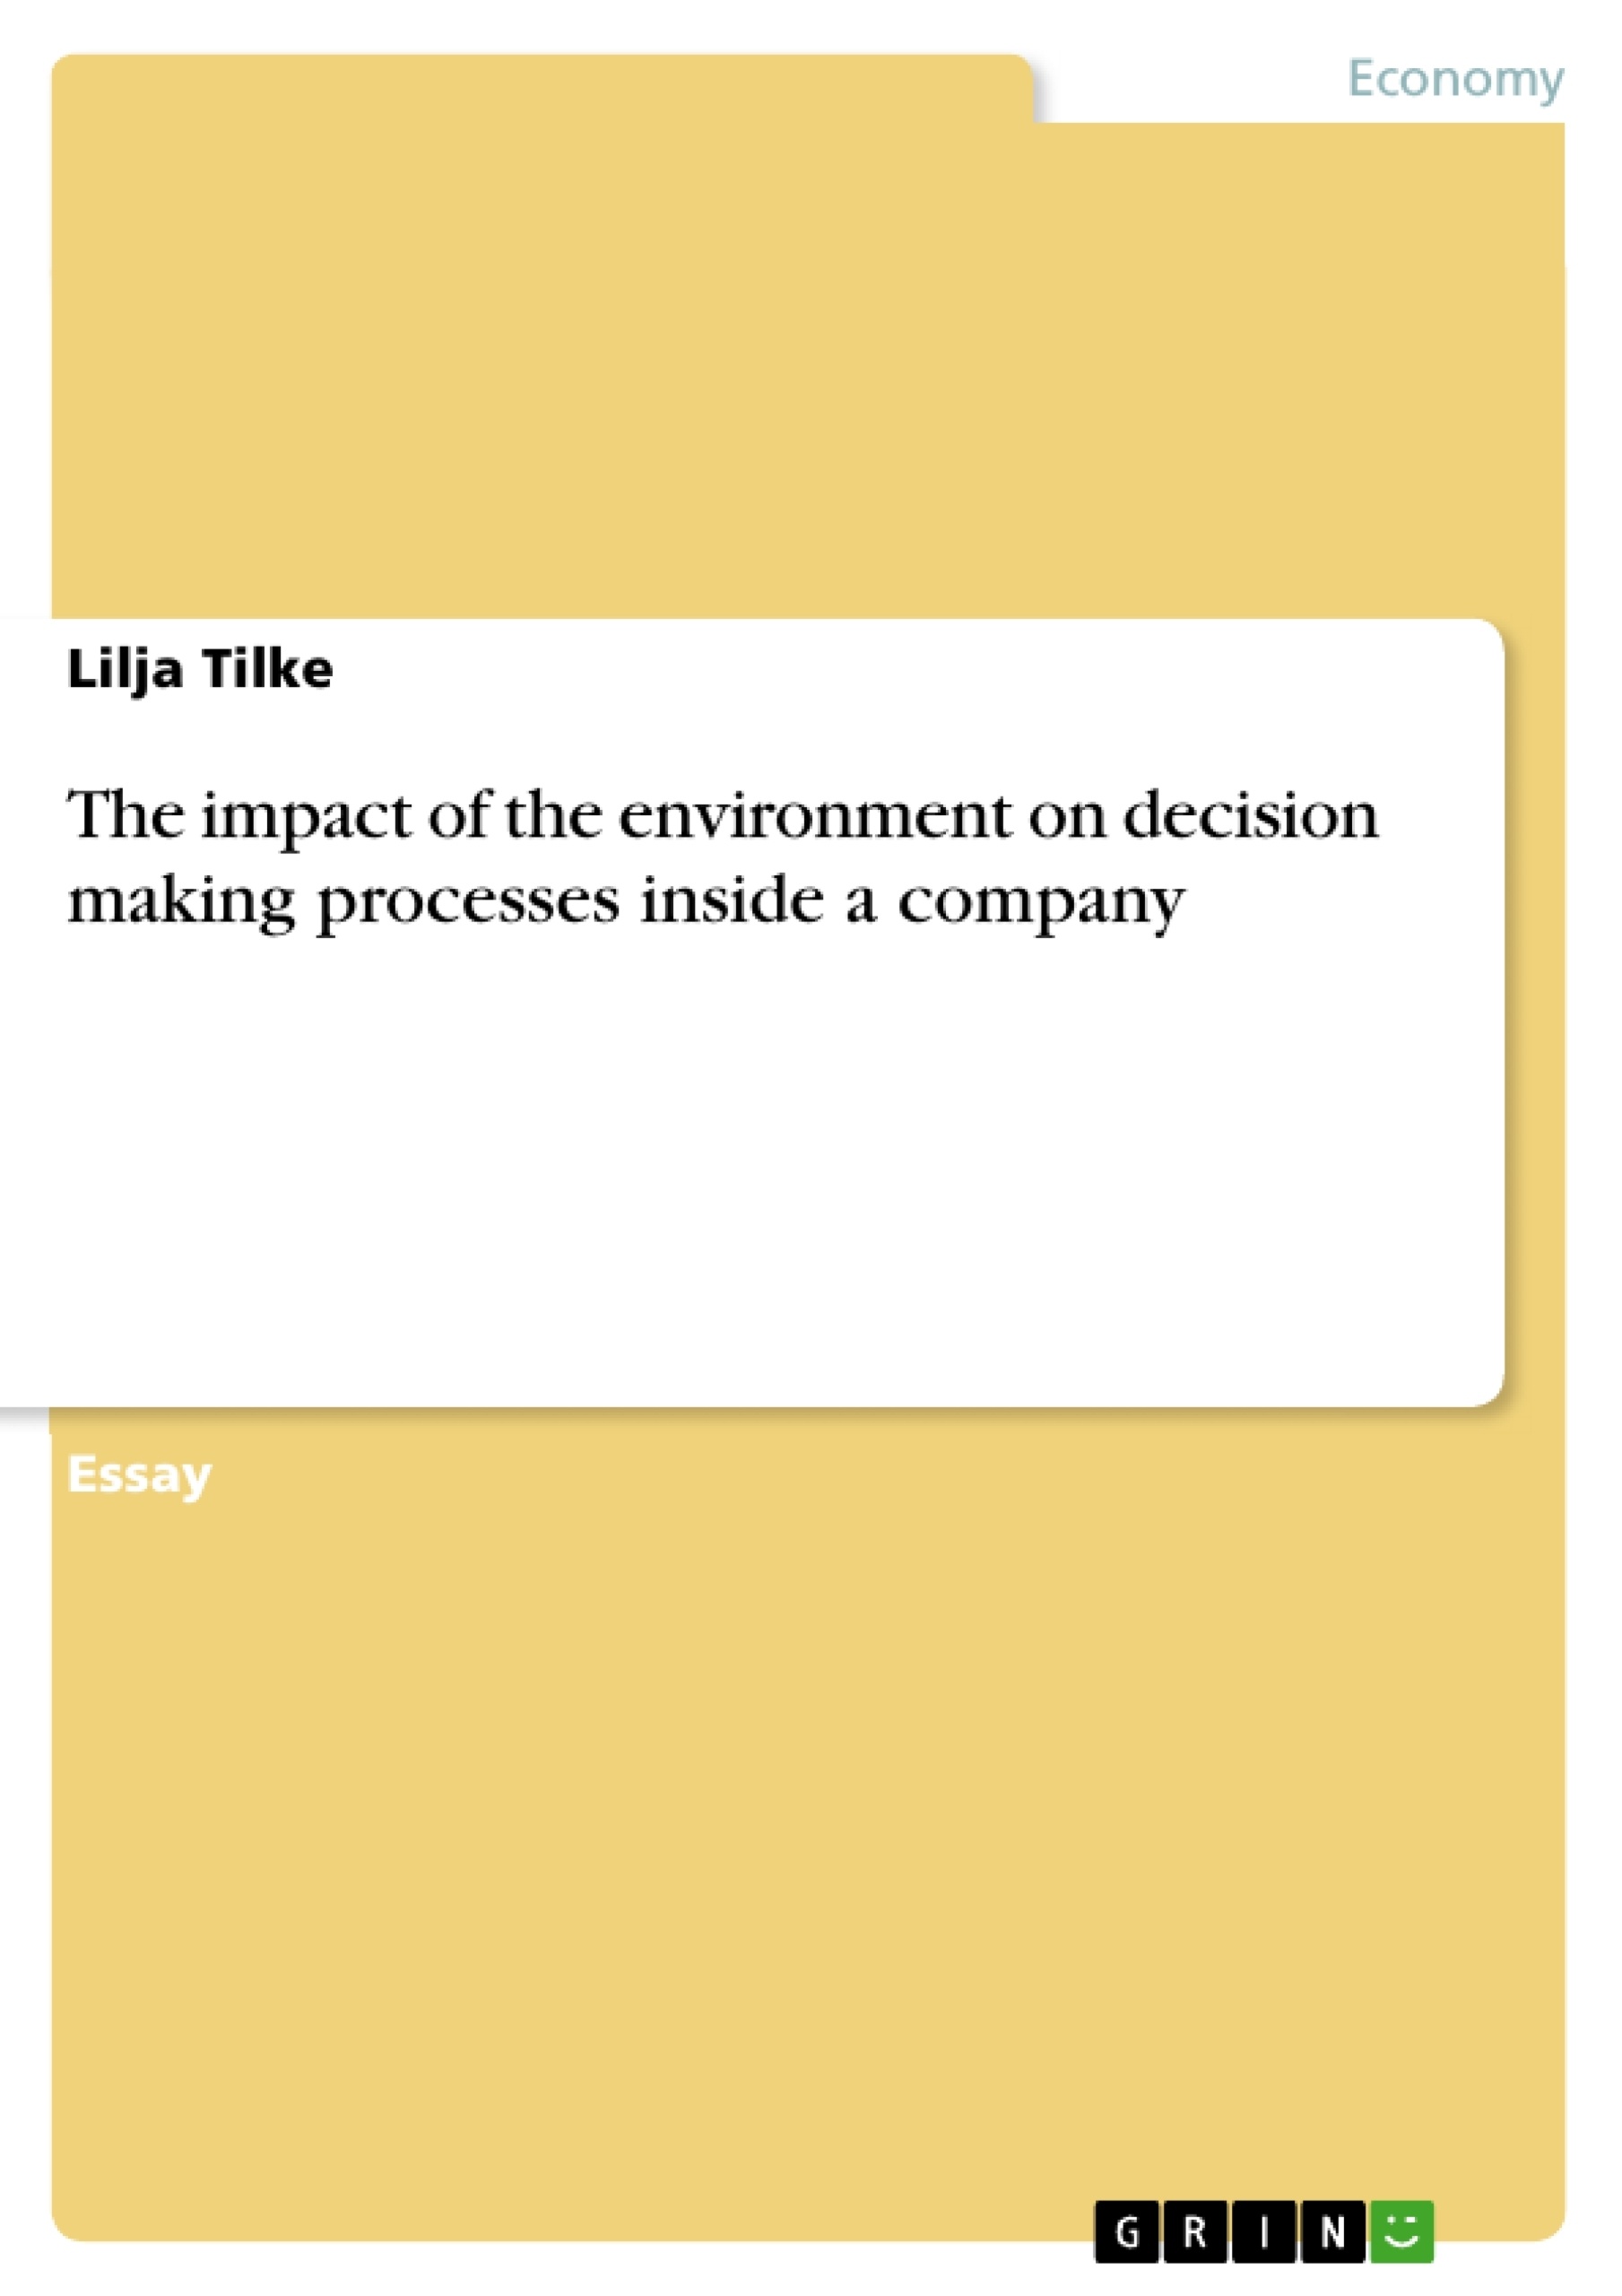 Title: The impact of the environment on decision making processes inside a company